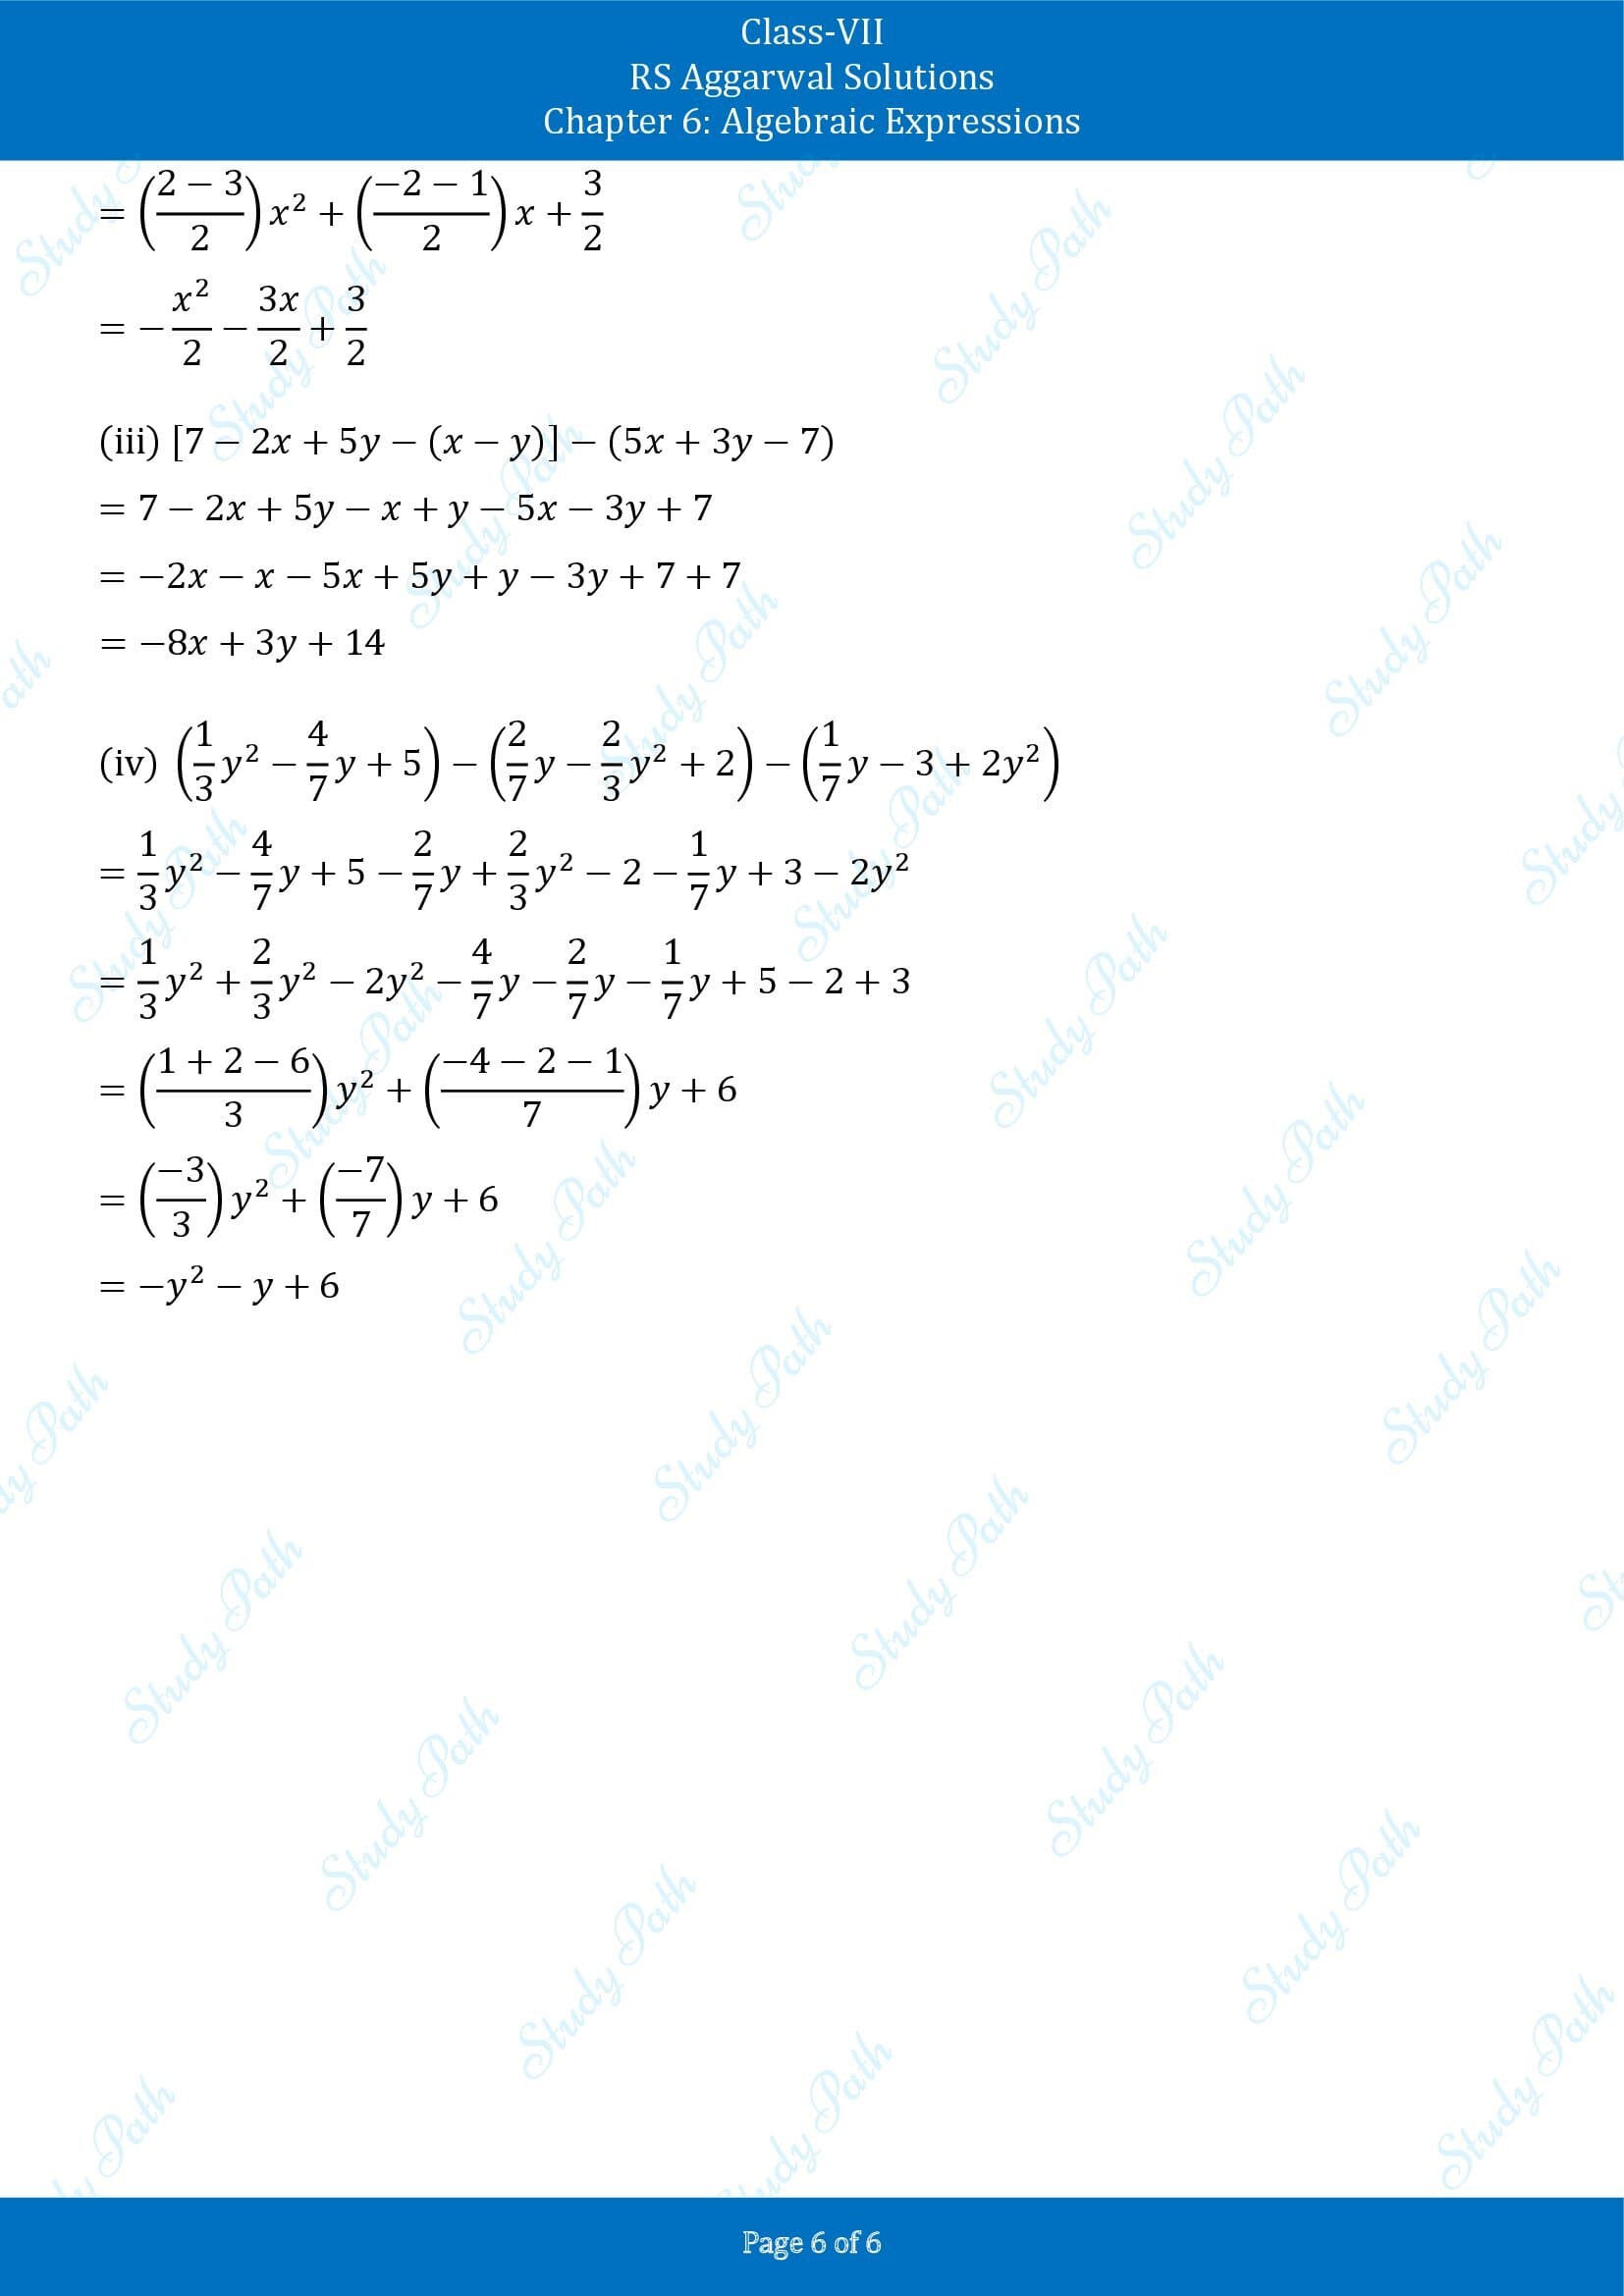 RS Aggarwal Solutions Class 7 Chapter 6 Algebraic Expresions Exercise 6A 00006